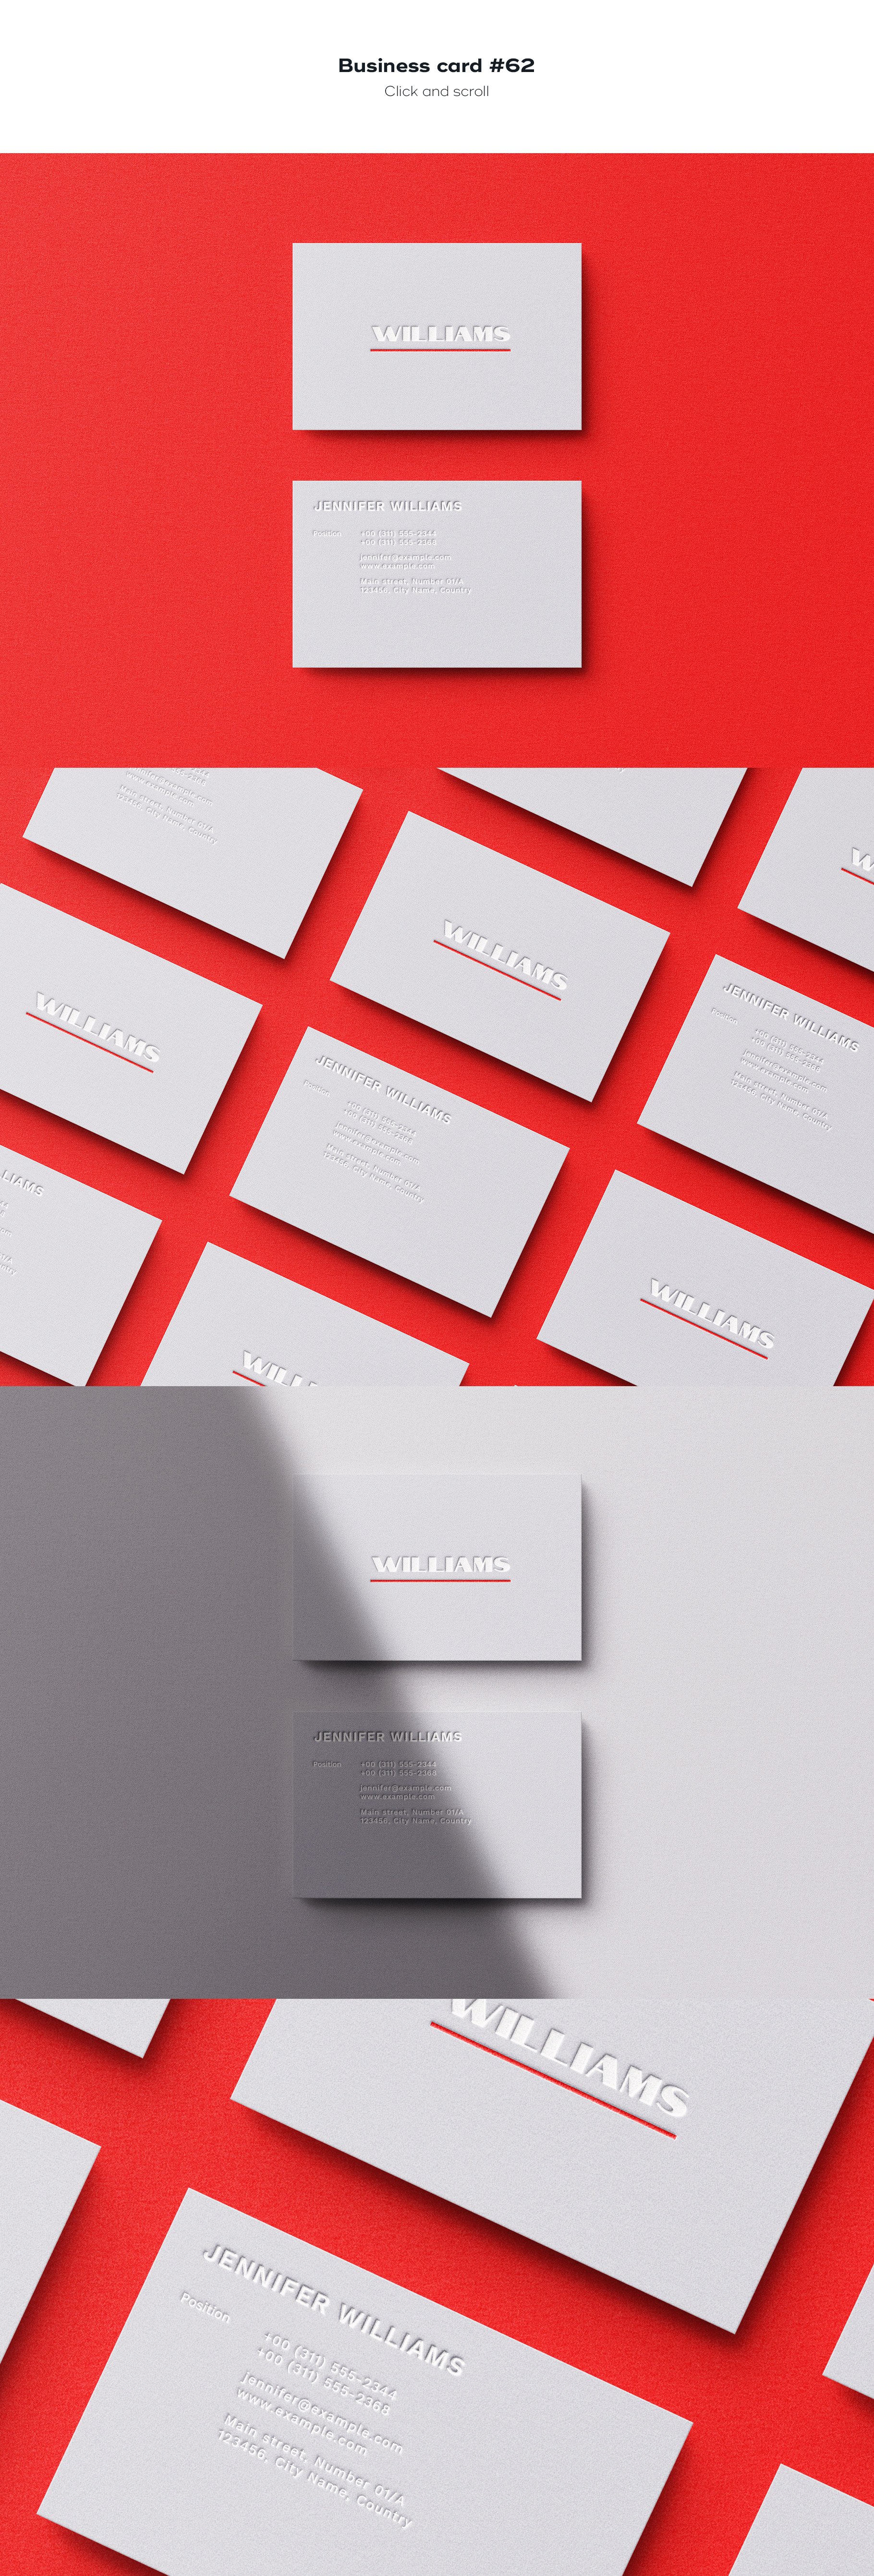 business card 62 784